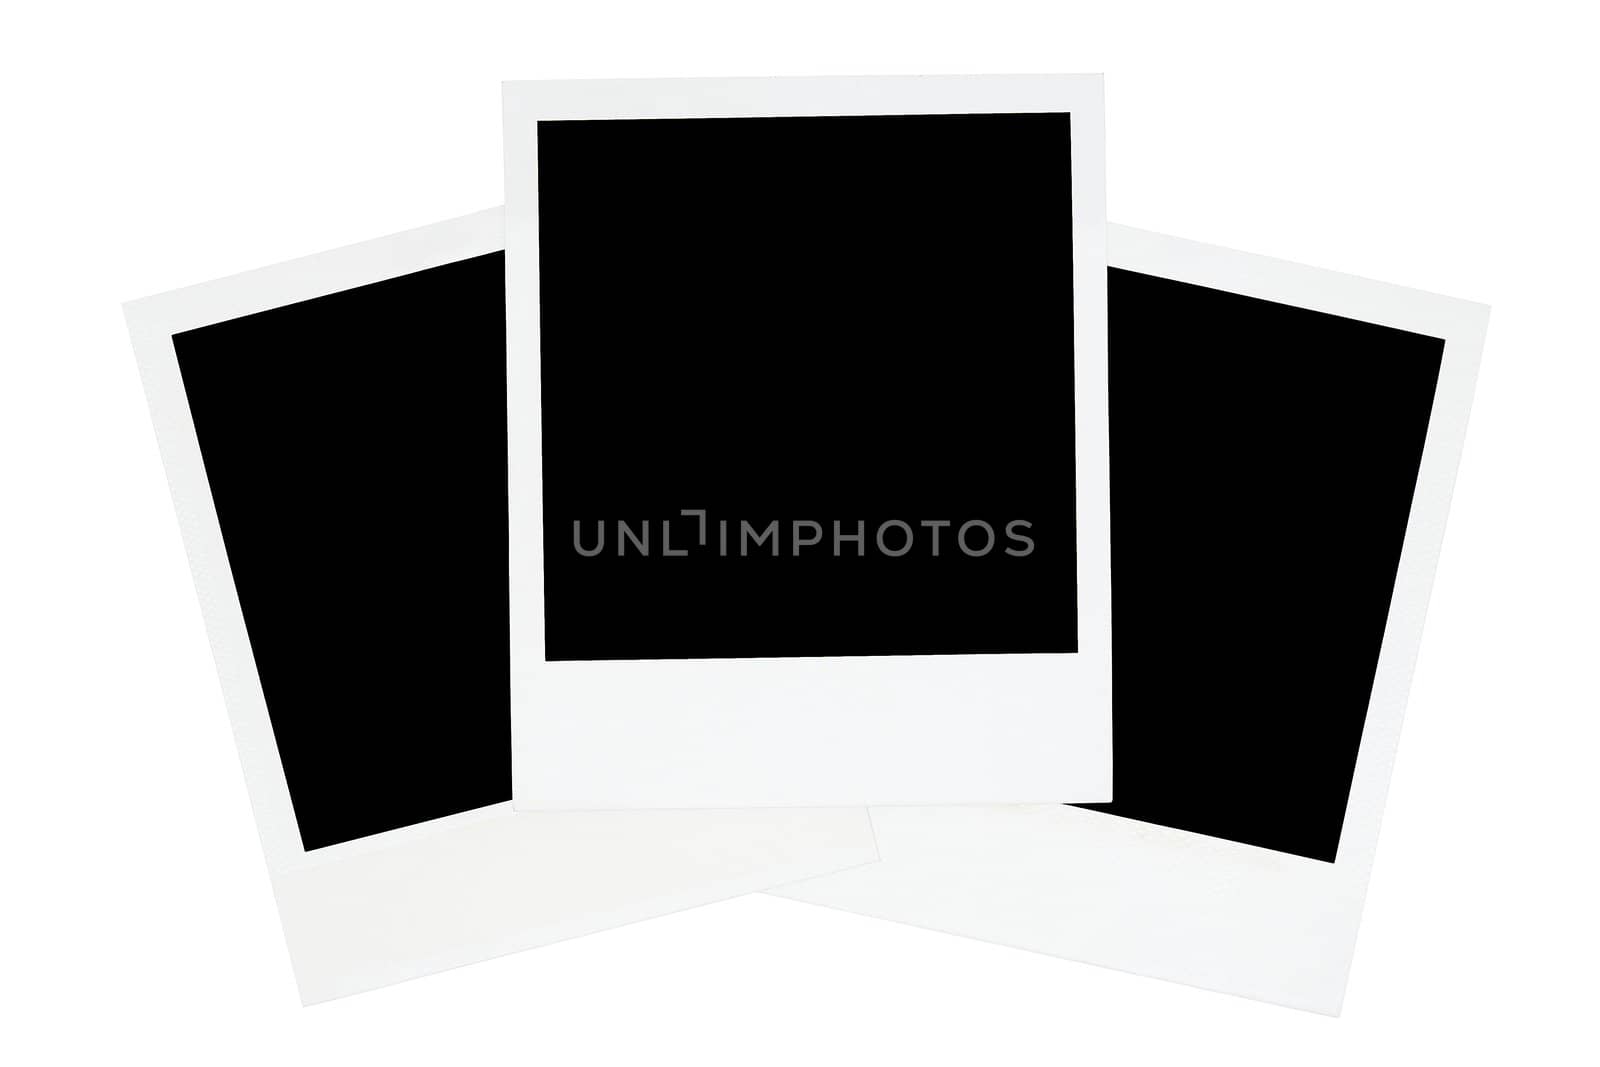 Three Old-fashioned Photo Frames by winterling